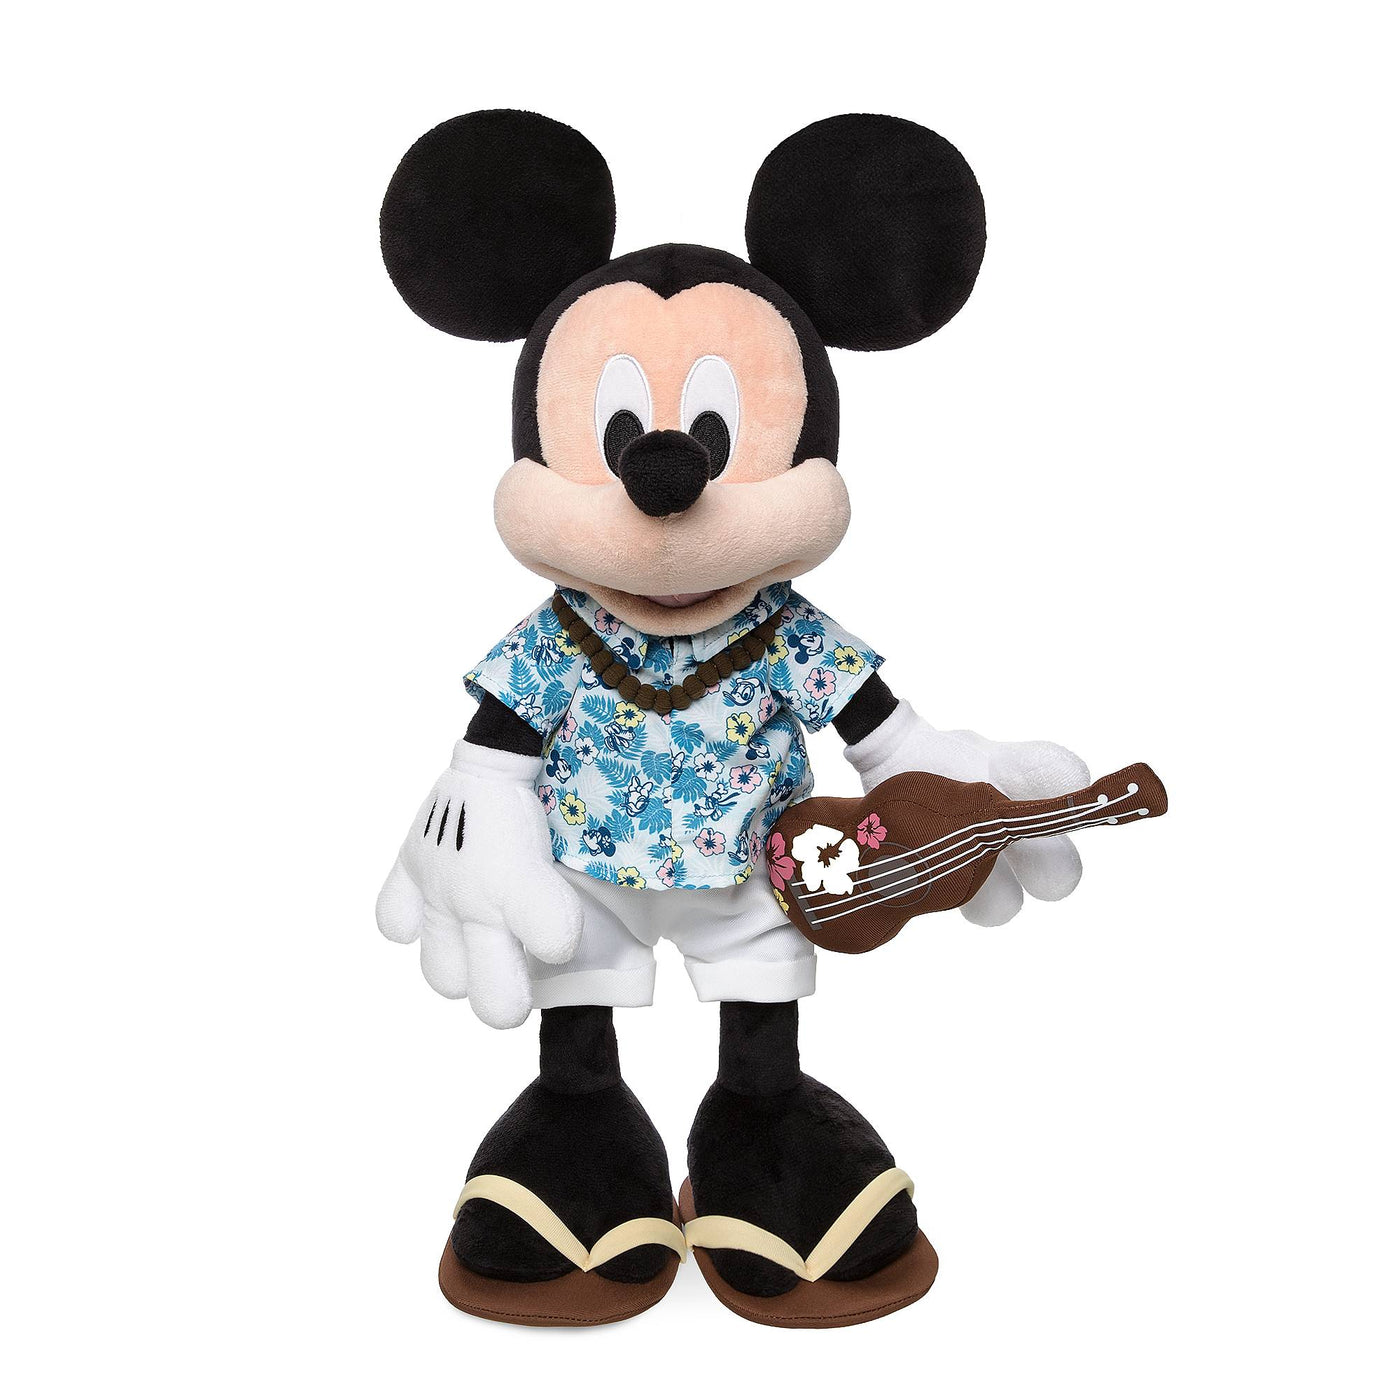 Disney Store Mickey Mouse Hawaii Plush New with Tag